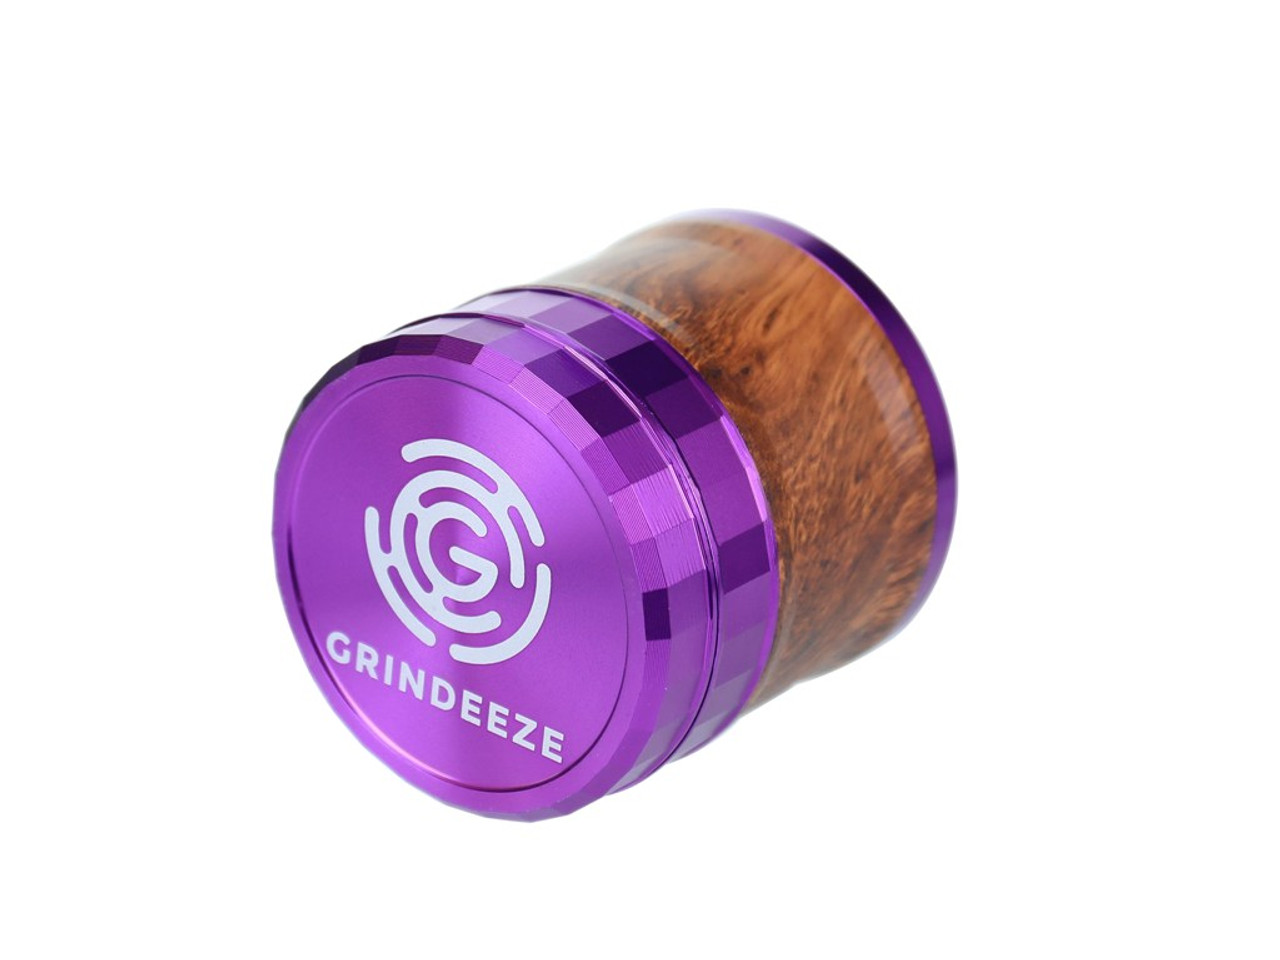 Grind Eeze 63mm Grinder with Pull Out Side and Grain Finish - Assorted Colors